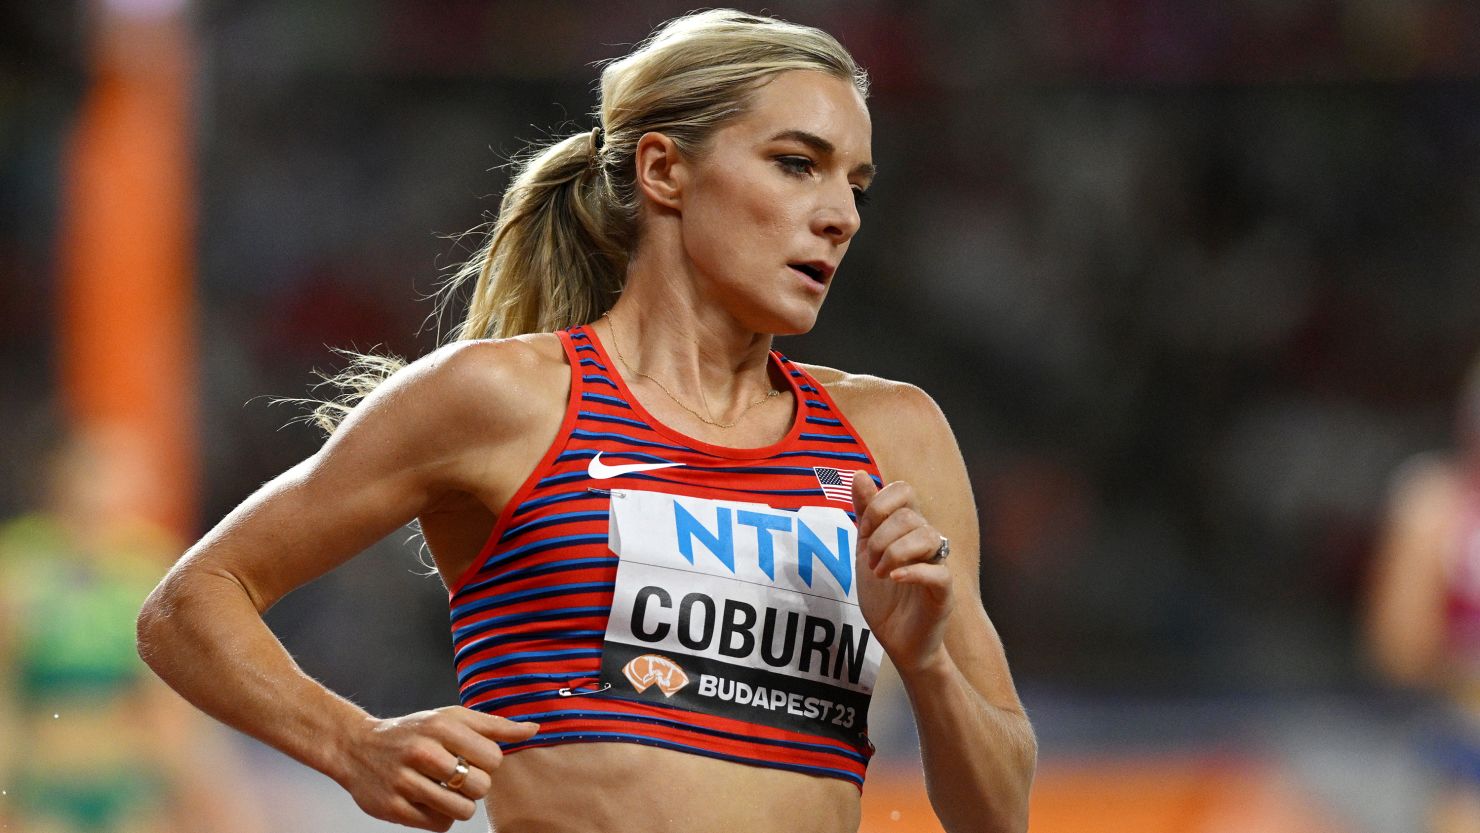 Coburn will most out on this year's Olympics after breaking her ankle.